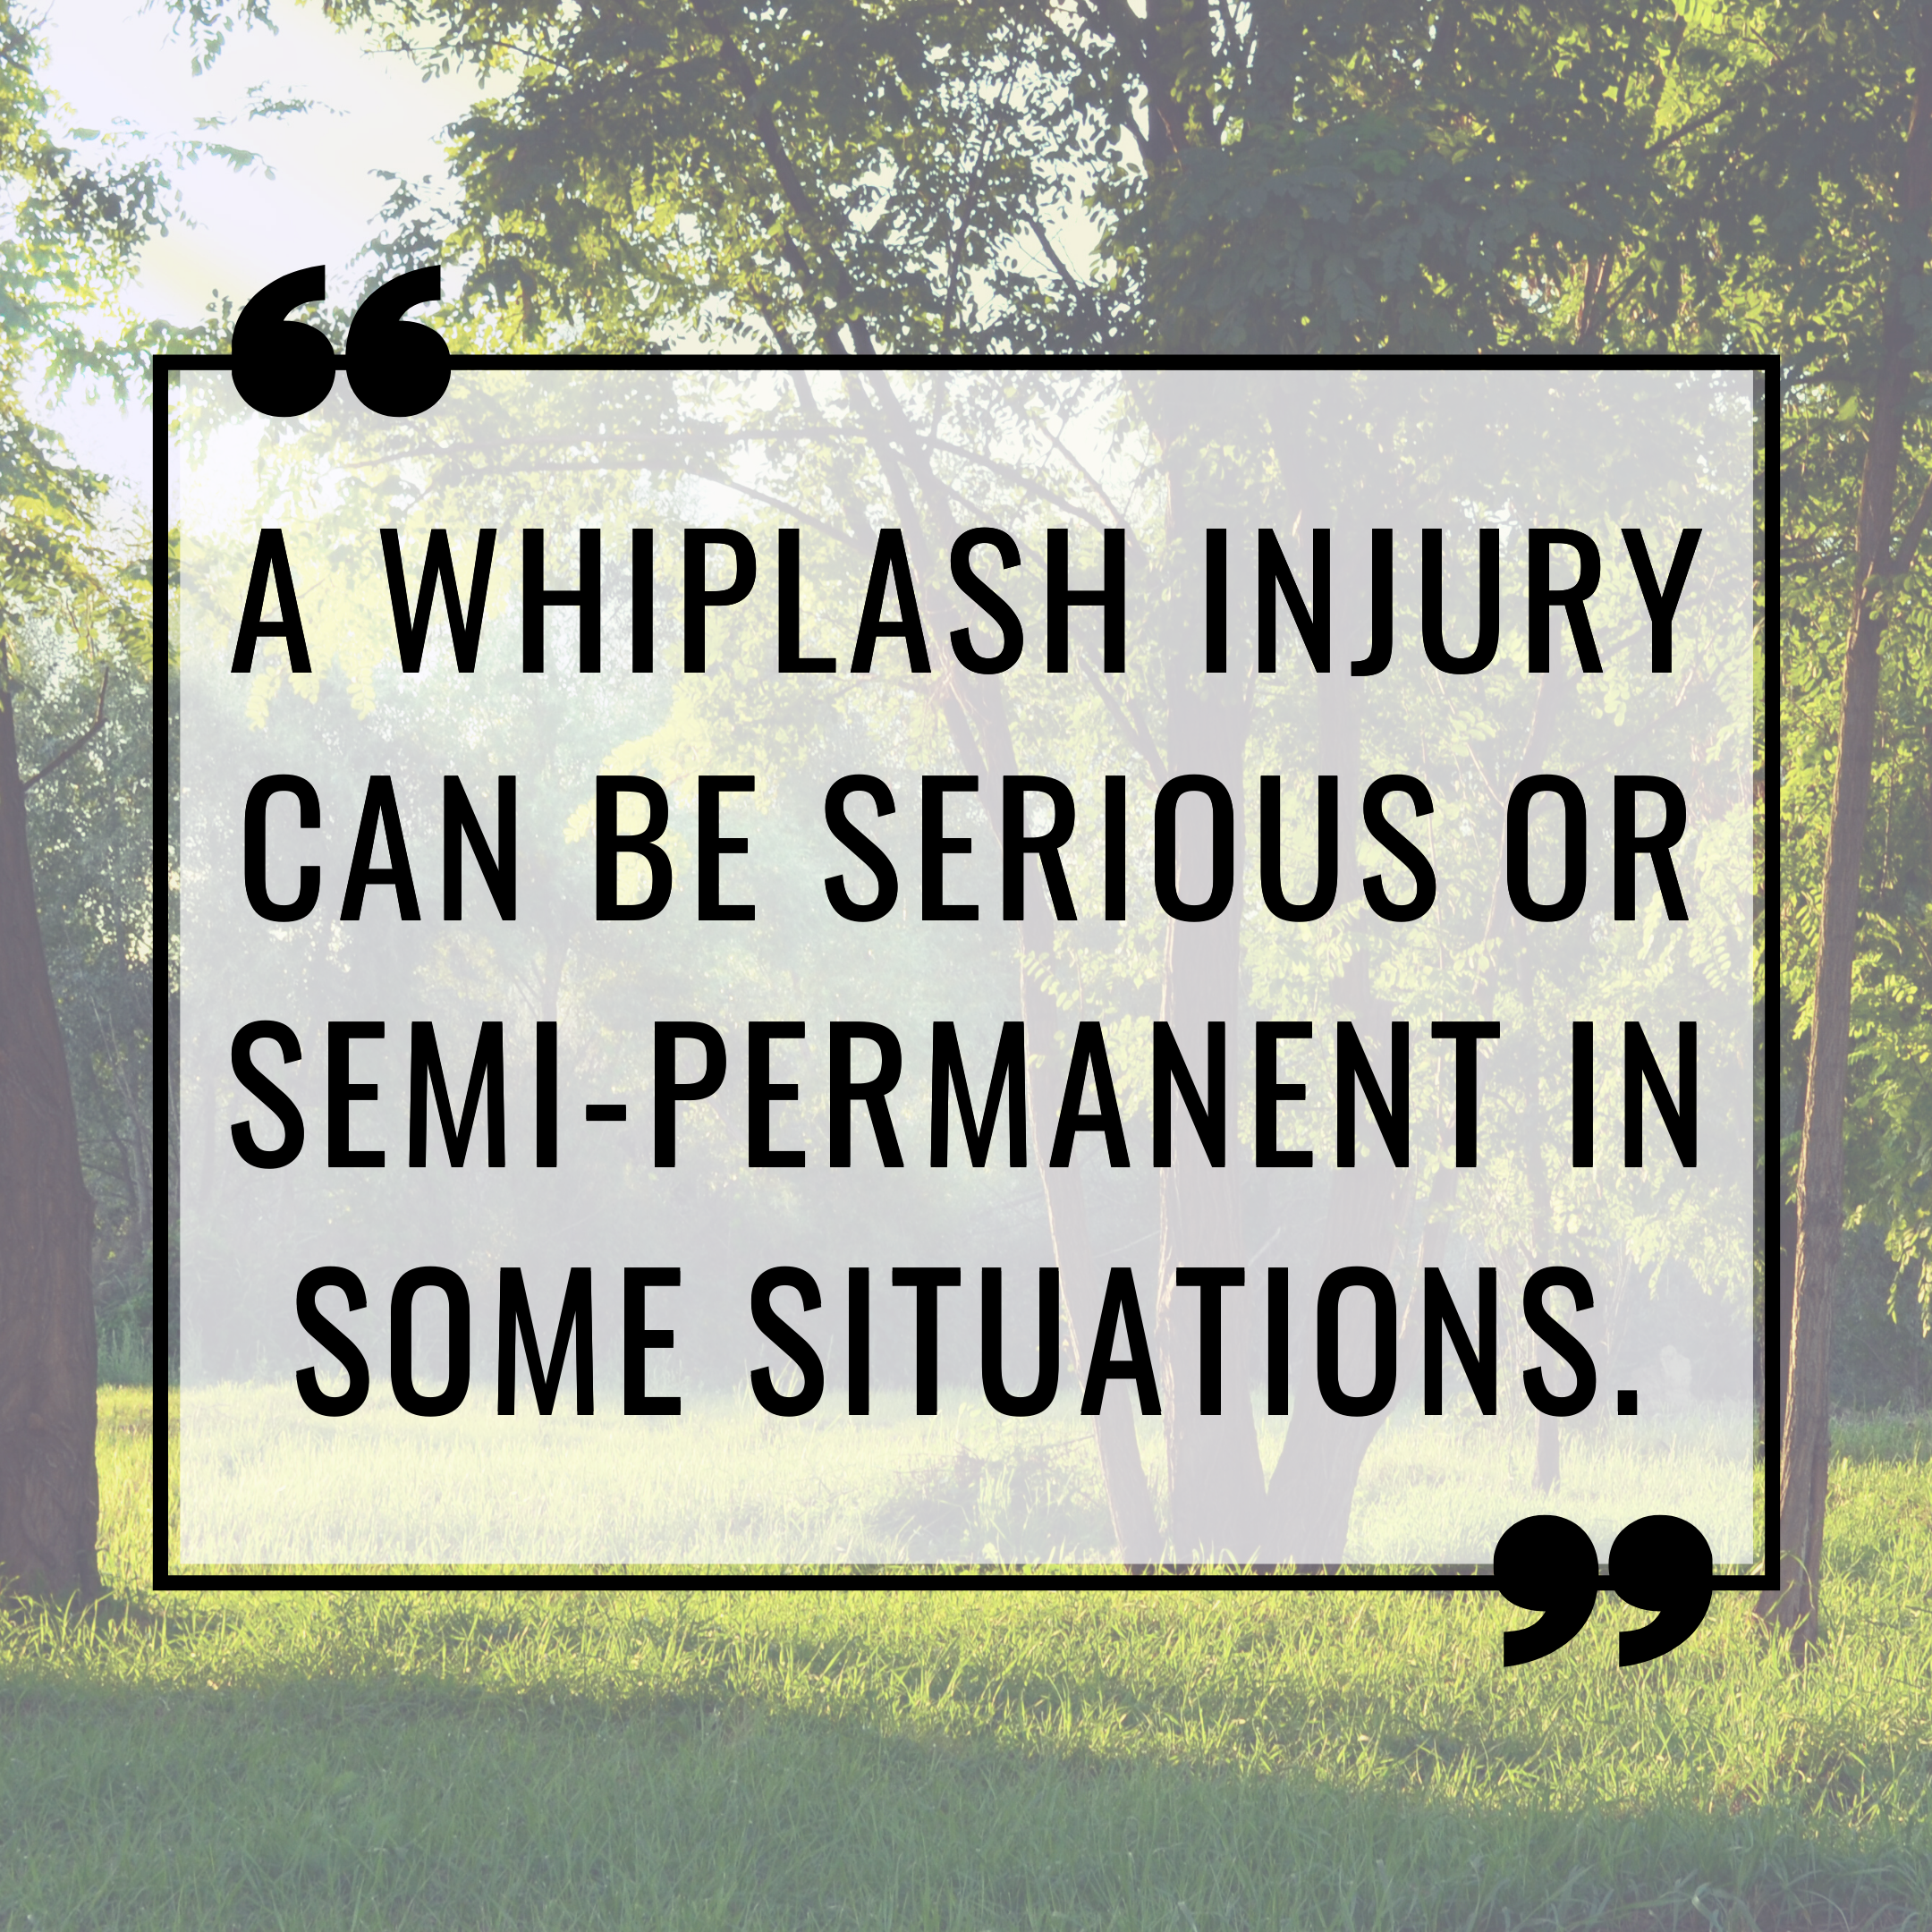 A whiplash injury can be serious or semi-permanent in some situations.